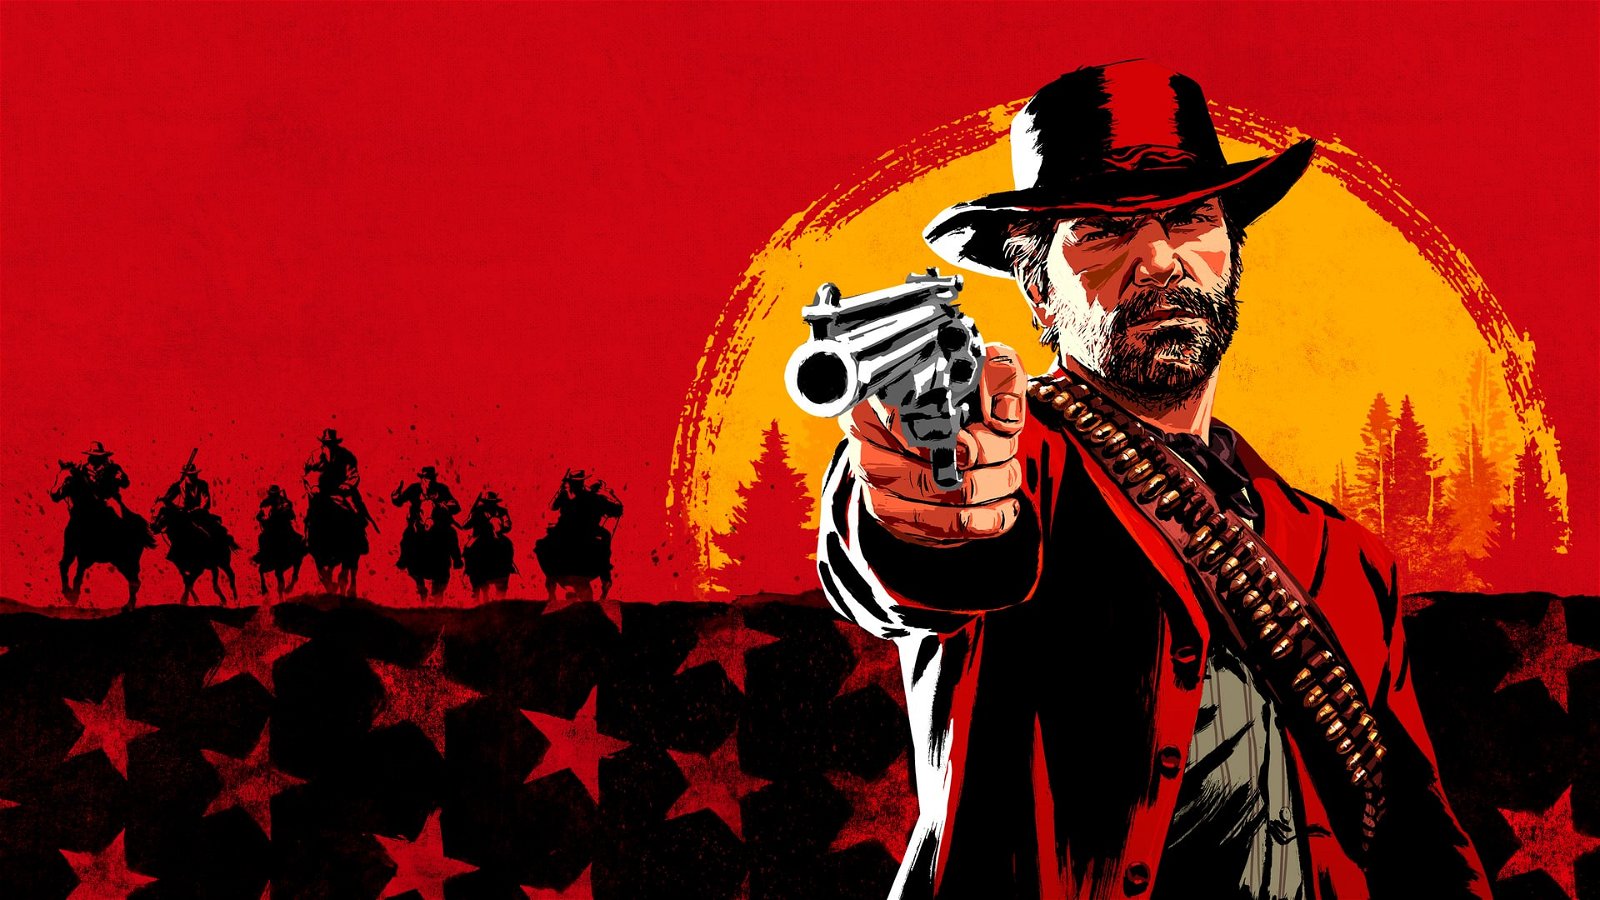 Red Dead Redemption 2 fans are discovering “amazing” details years after its release